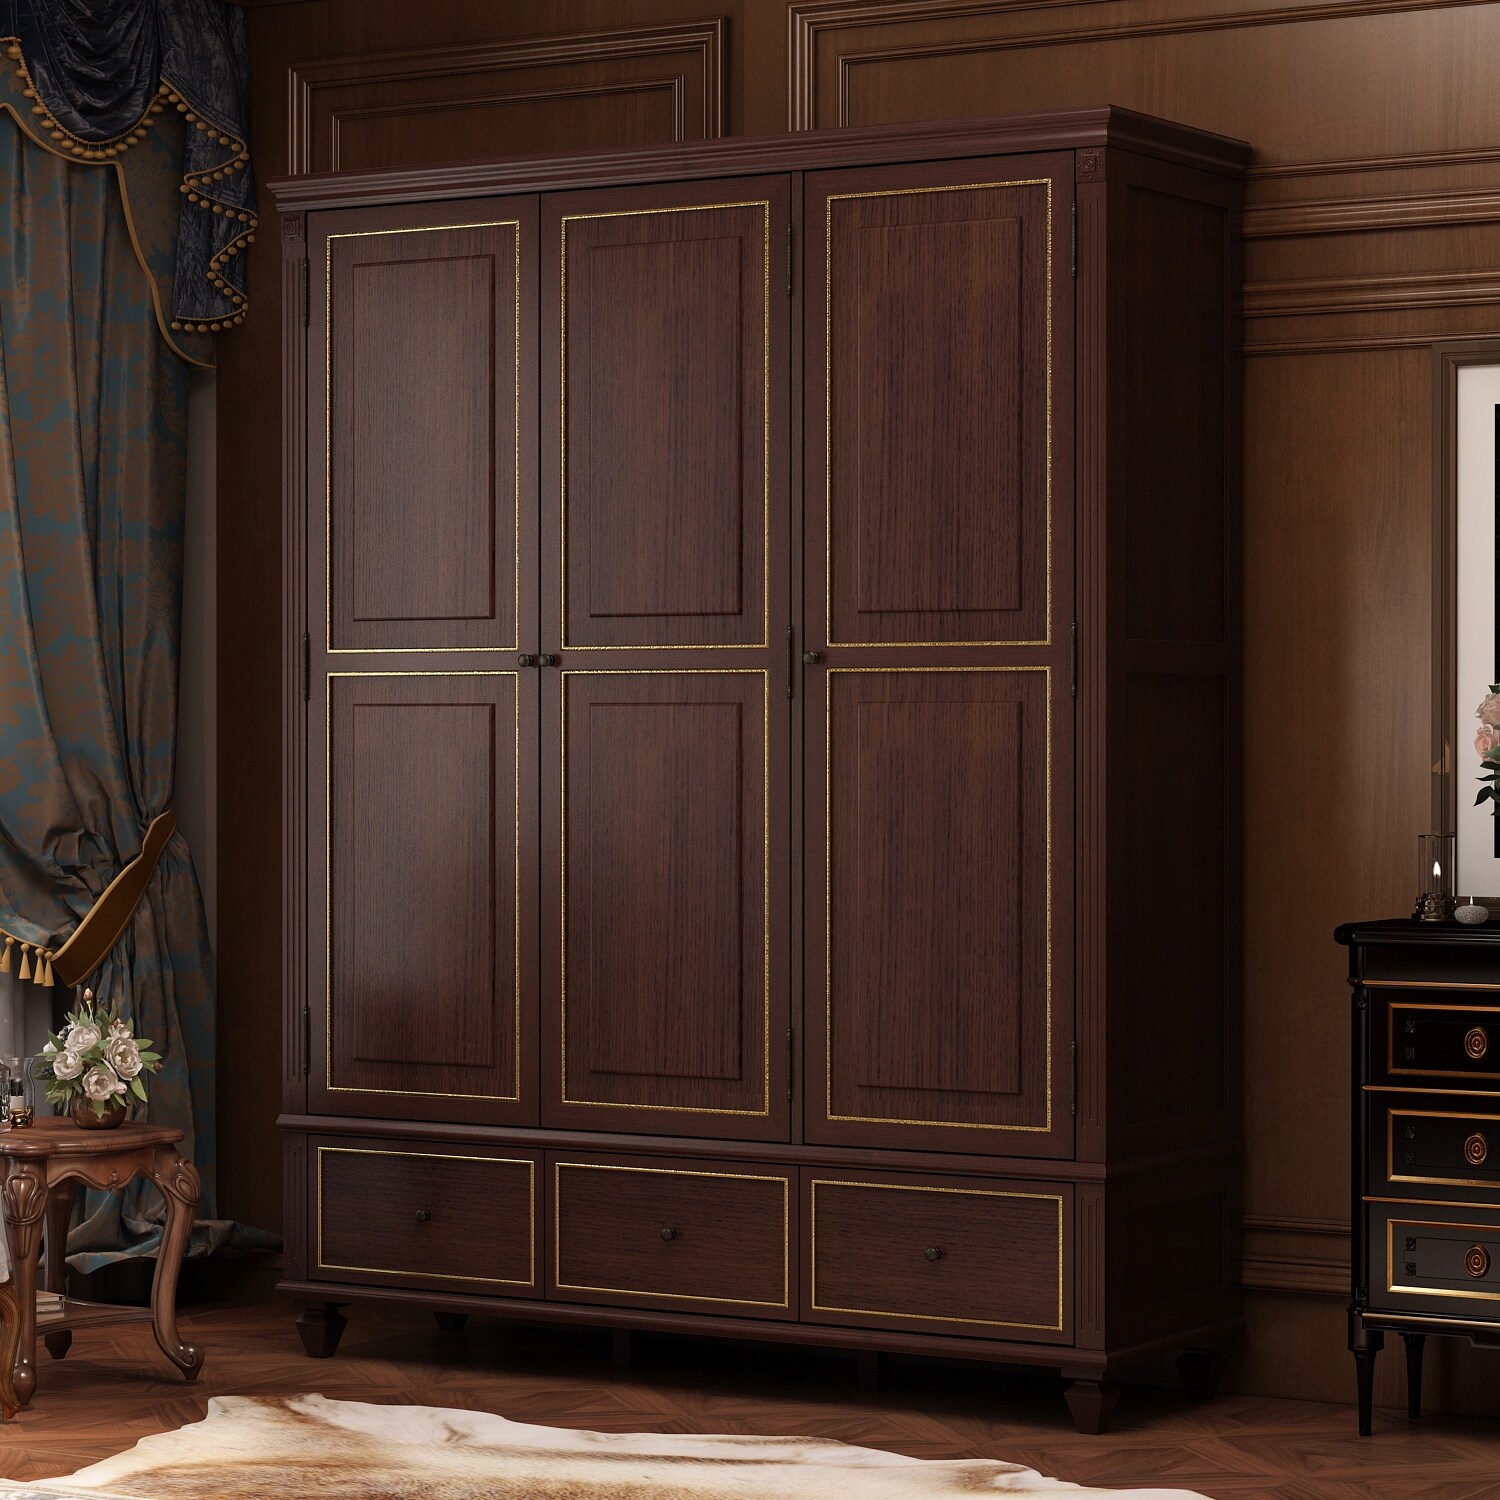 https://ak1.ostkcdn.com/images/products/is/images/direct/45026093781d60e85a0fc74a3b6a4ba8bef7e6d1/63%22W-Wooden-Family-Wardrobe-Armoire-Closet-Stroage-Cabinet-Lacquer.jpg